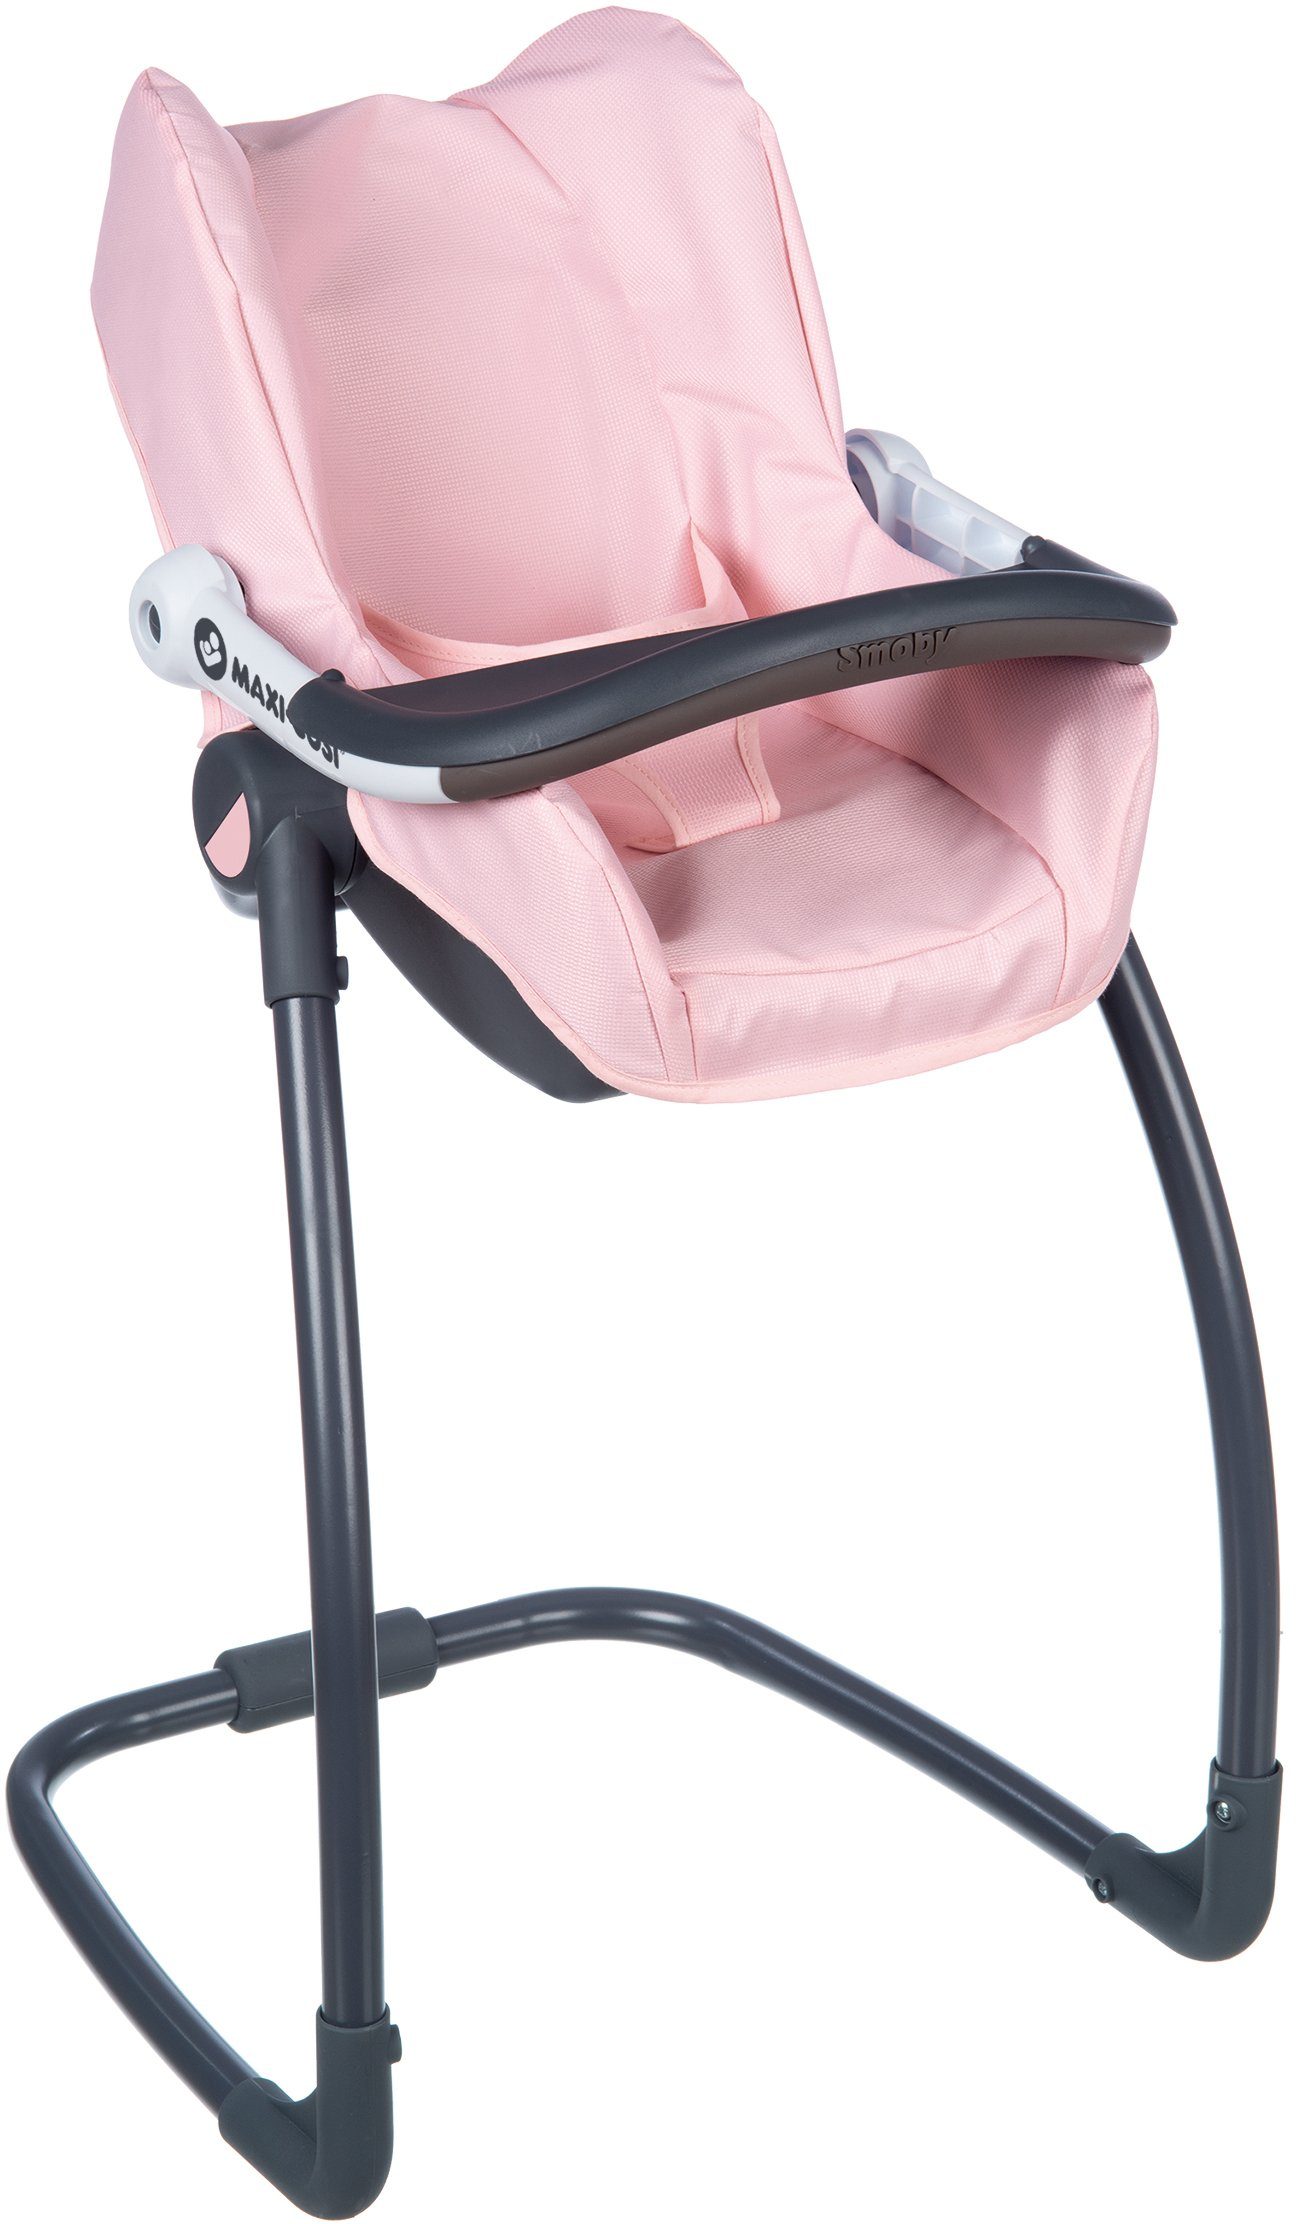 Smoby Puppenhochstuhl Maxi-Cosi Made Europe in 3in1